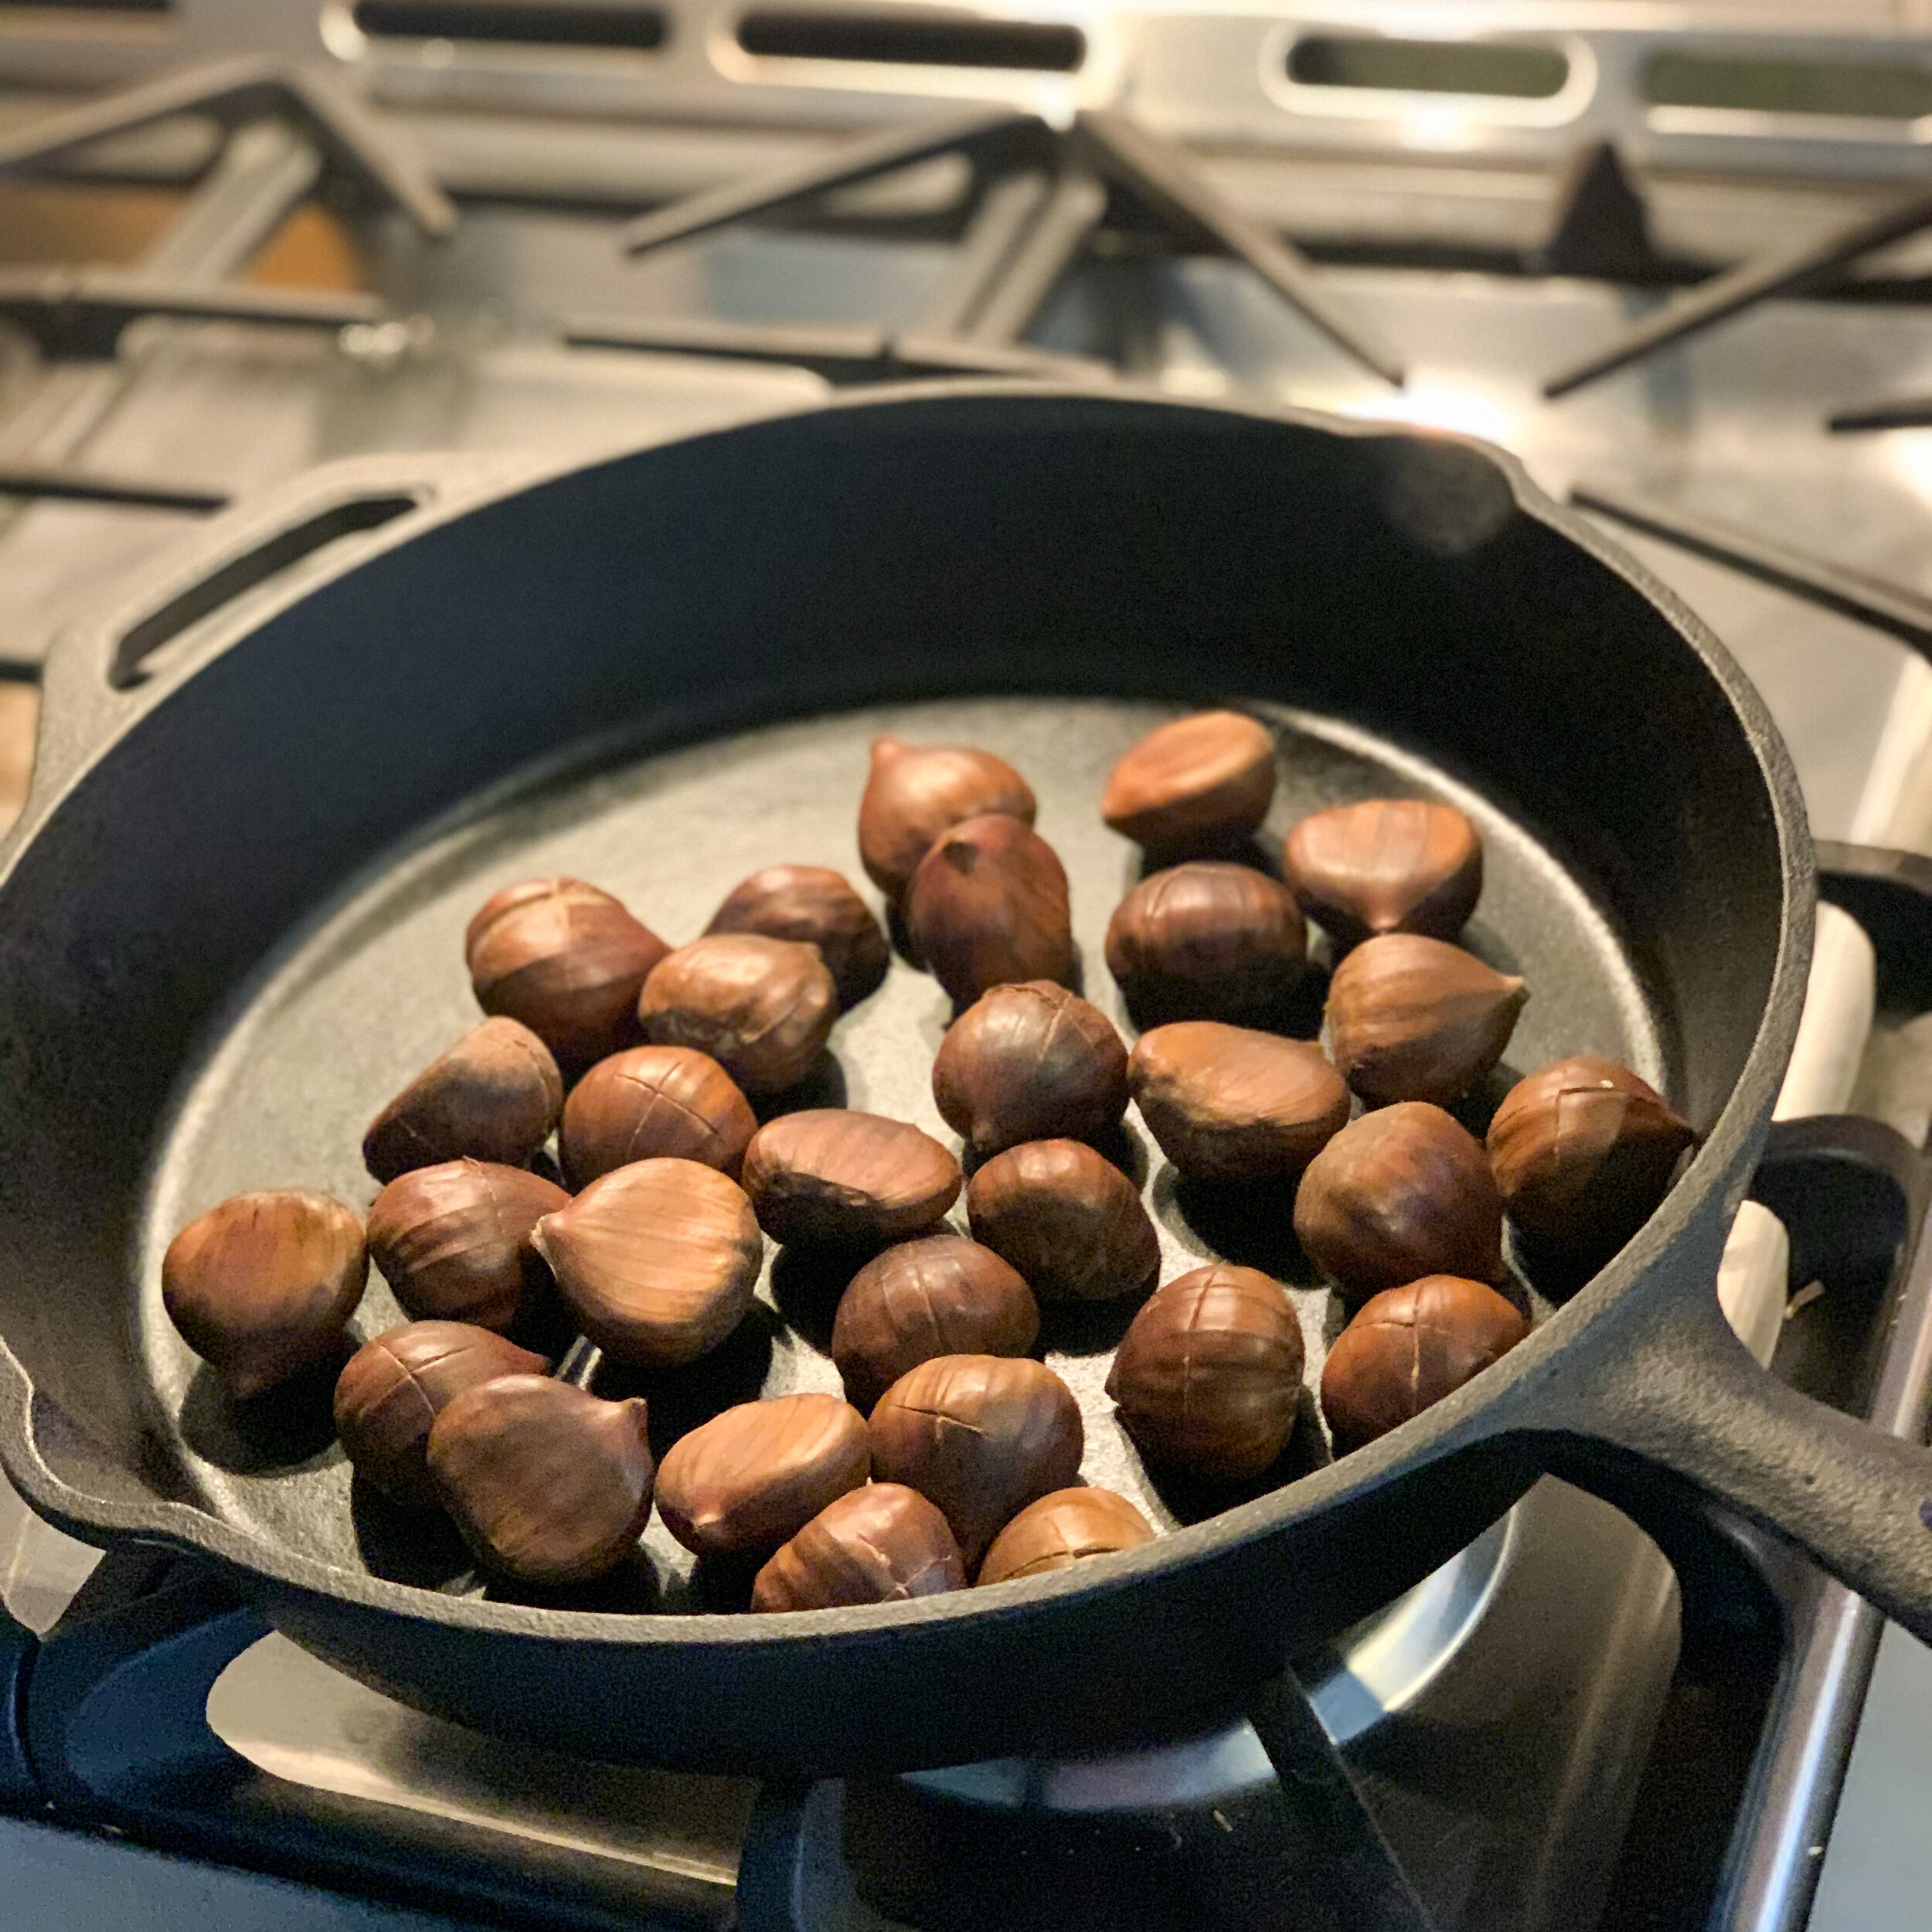 How to roast chestnuts in a cast iron skillet